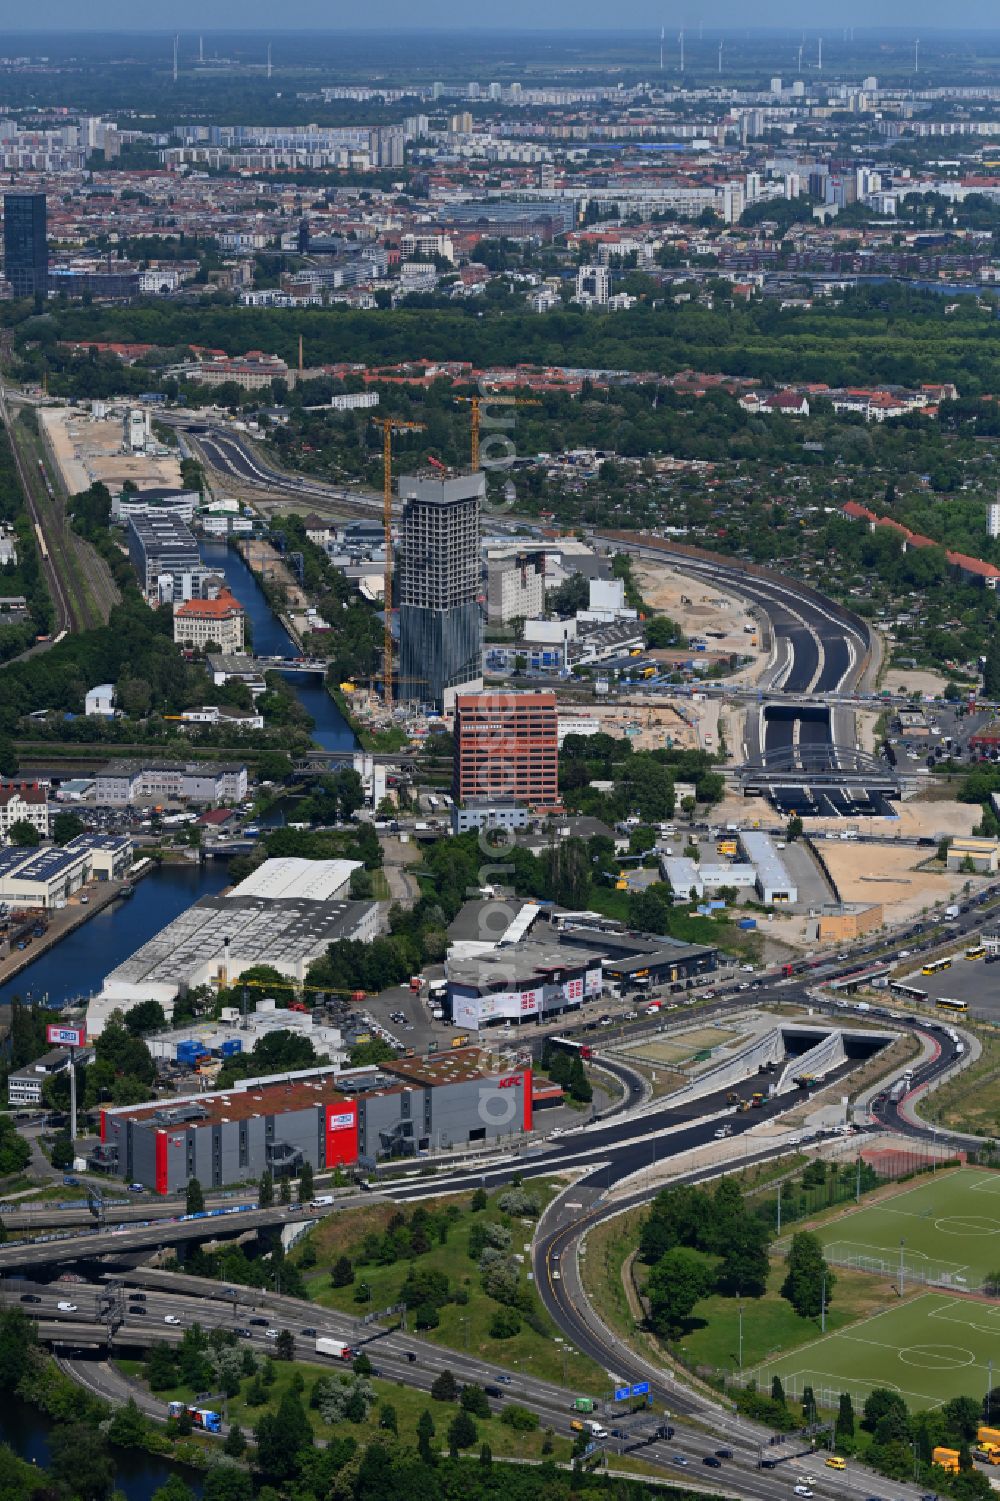 Berlin from the bird's eye view: Civil engineering construction sites - route for the new construction of the tunnel structures to extend the city motorway - federal motorway BAB A100 on the Neukoellnische Allee street in the Neukoelln district in Berlin, Germany